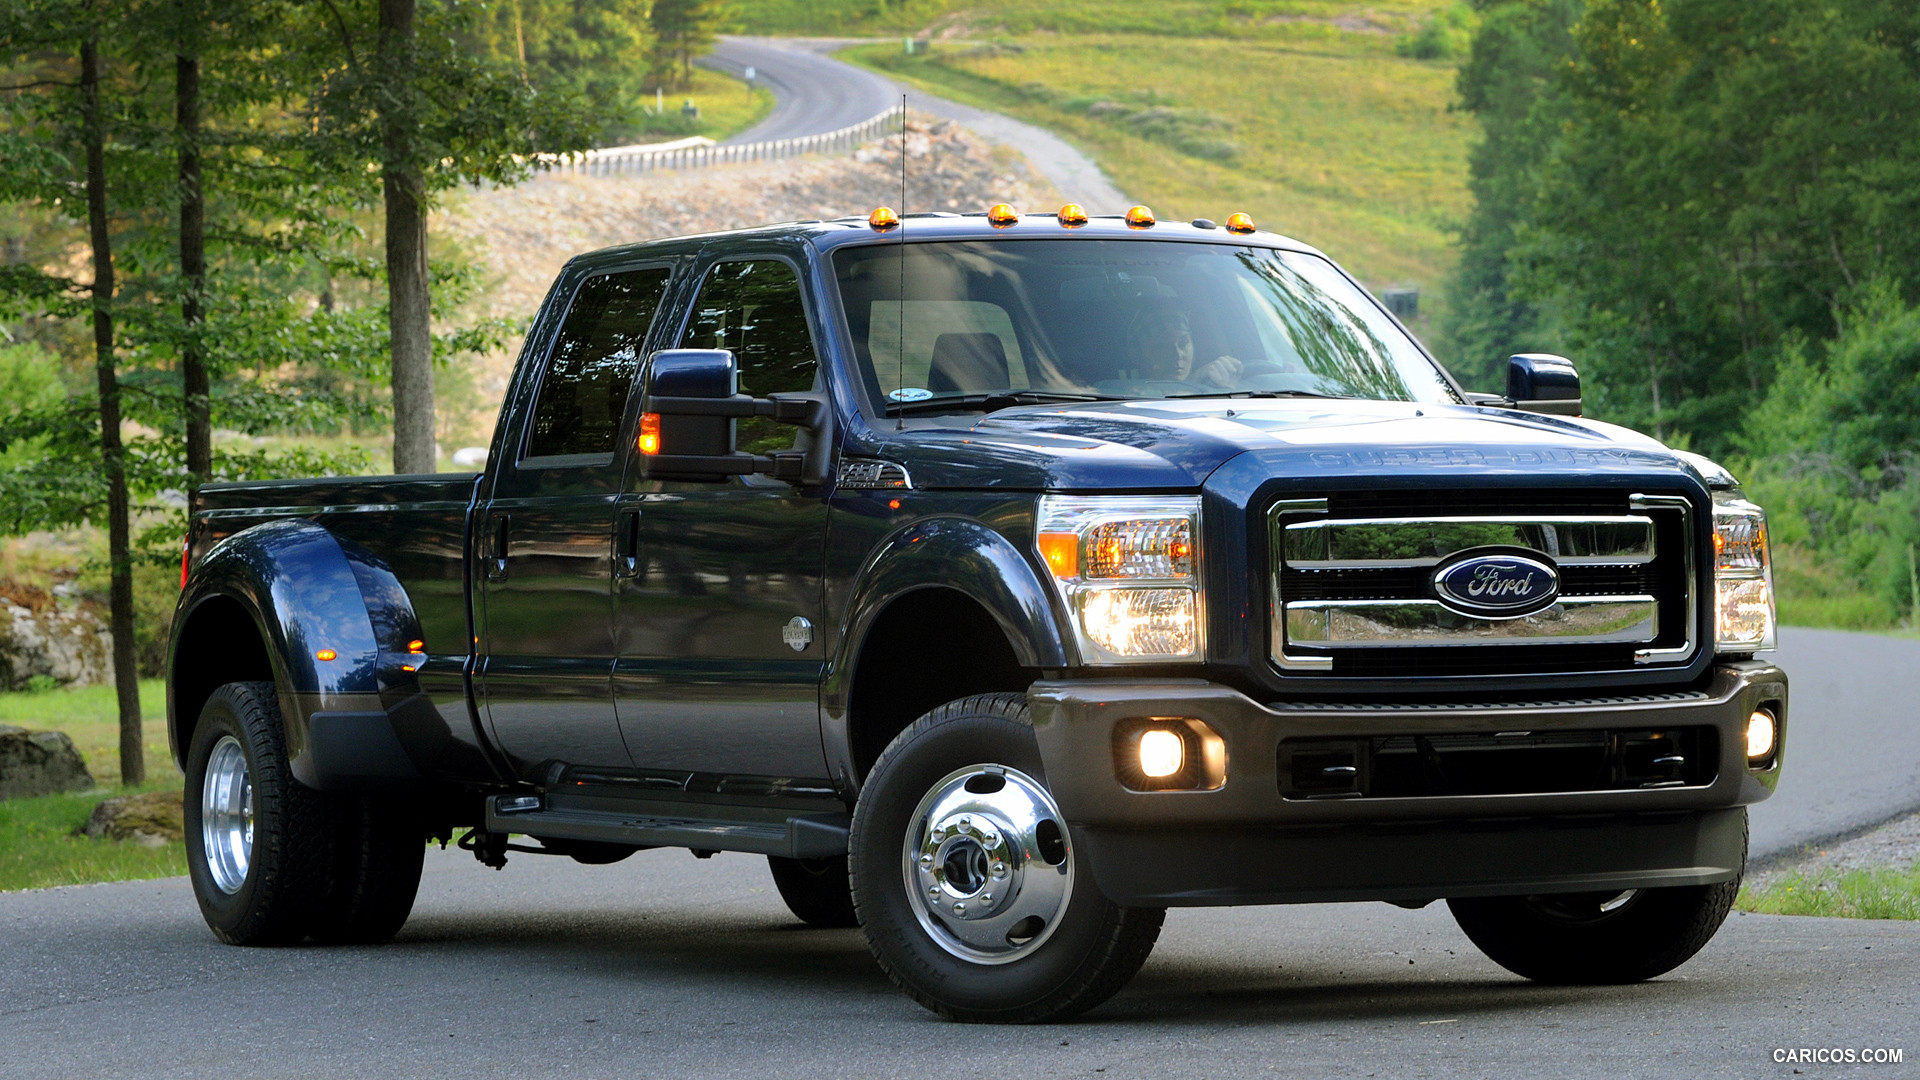 Nice Images Collection: 2015 Ford F-Series Super Duty Desktop Wallpapers